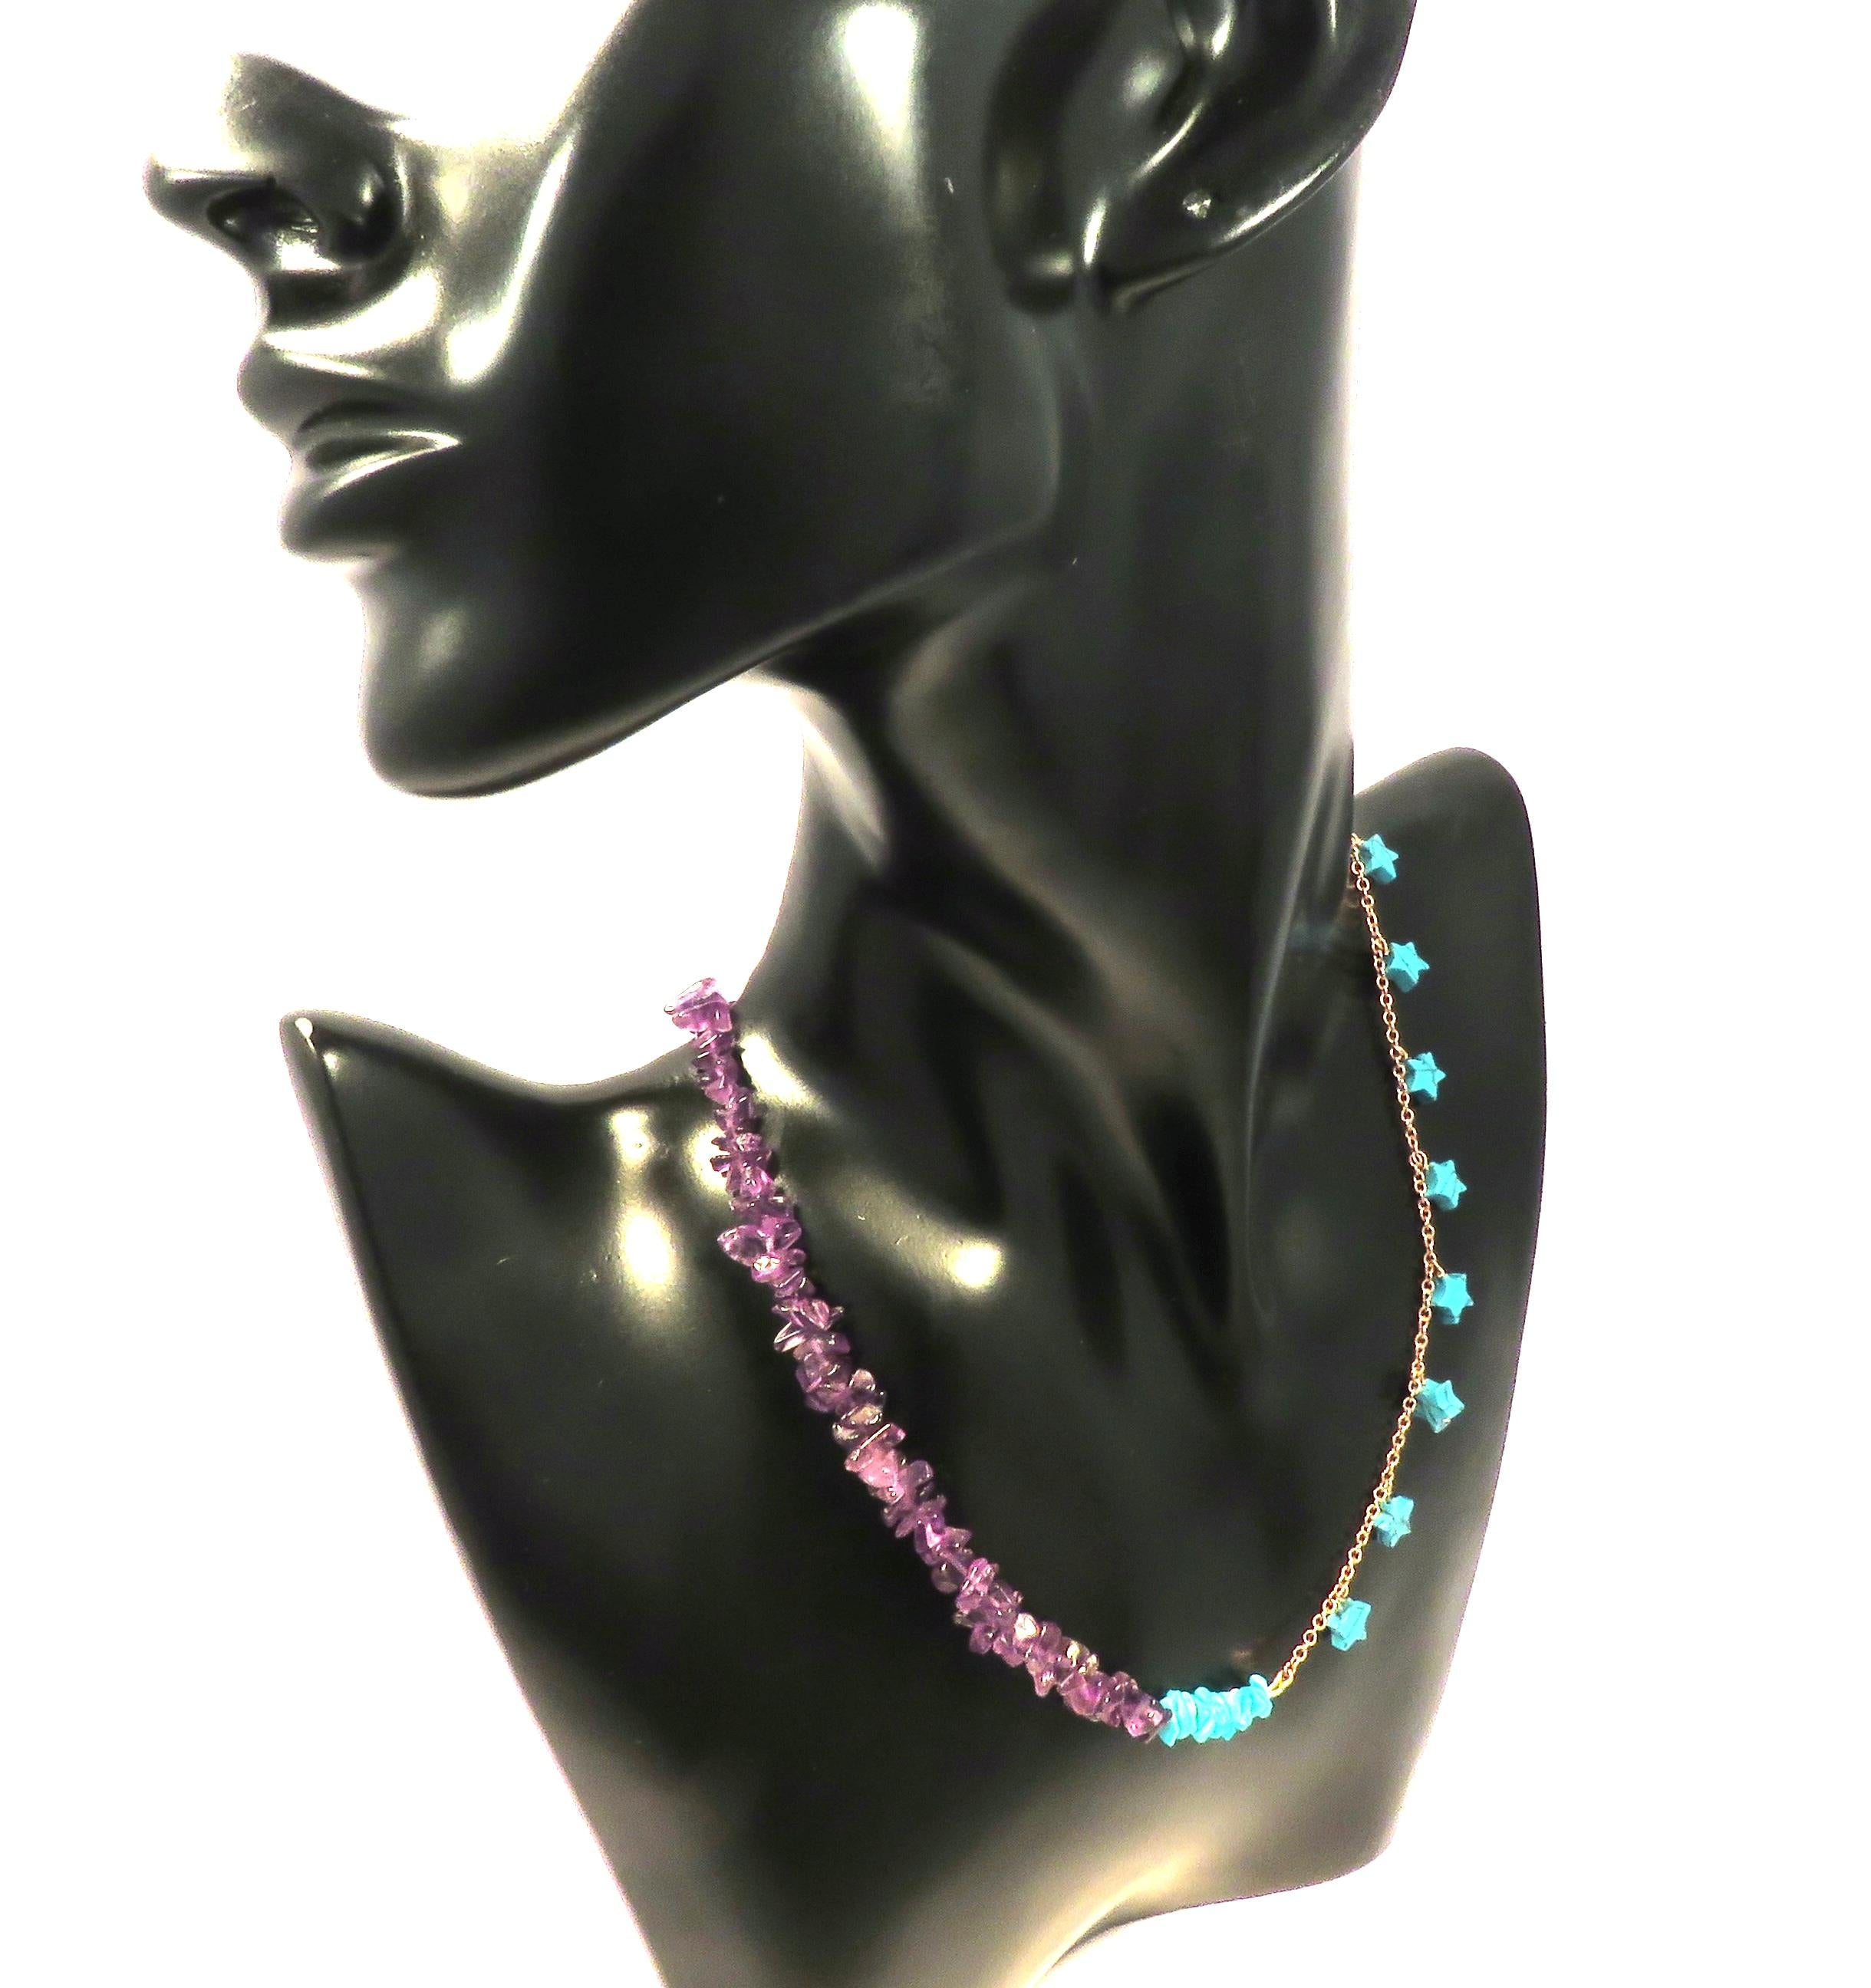 Beautiful necklace which combines the fresh blue of turquoise and the warm purple of amethyst. Genuine star cut turquoise and nugget cut amethyst and turquoise are hand-linked in 9 karat rose gold. The necklace length is adjustable from 400 mm to